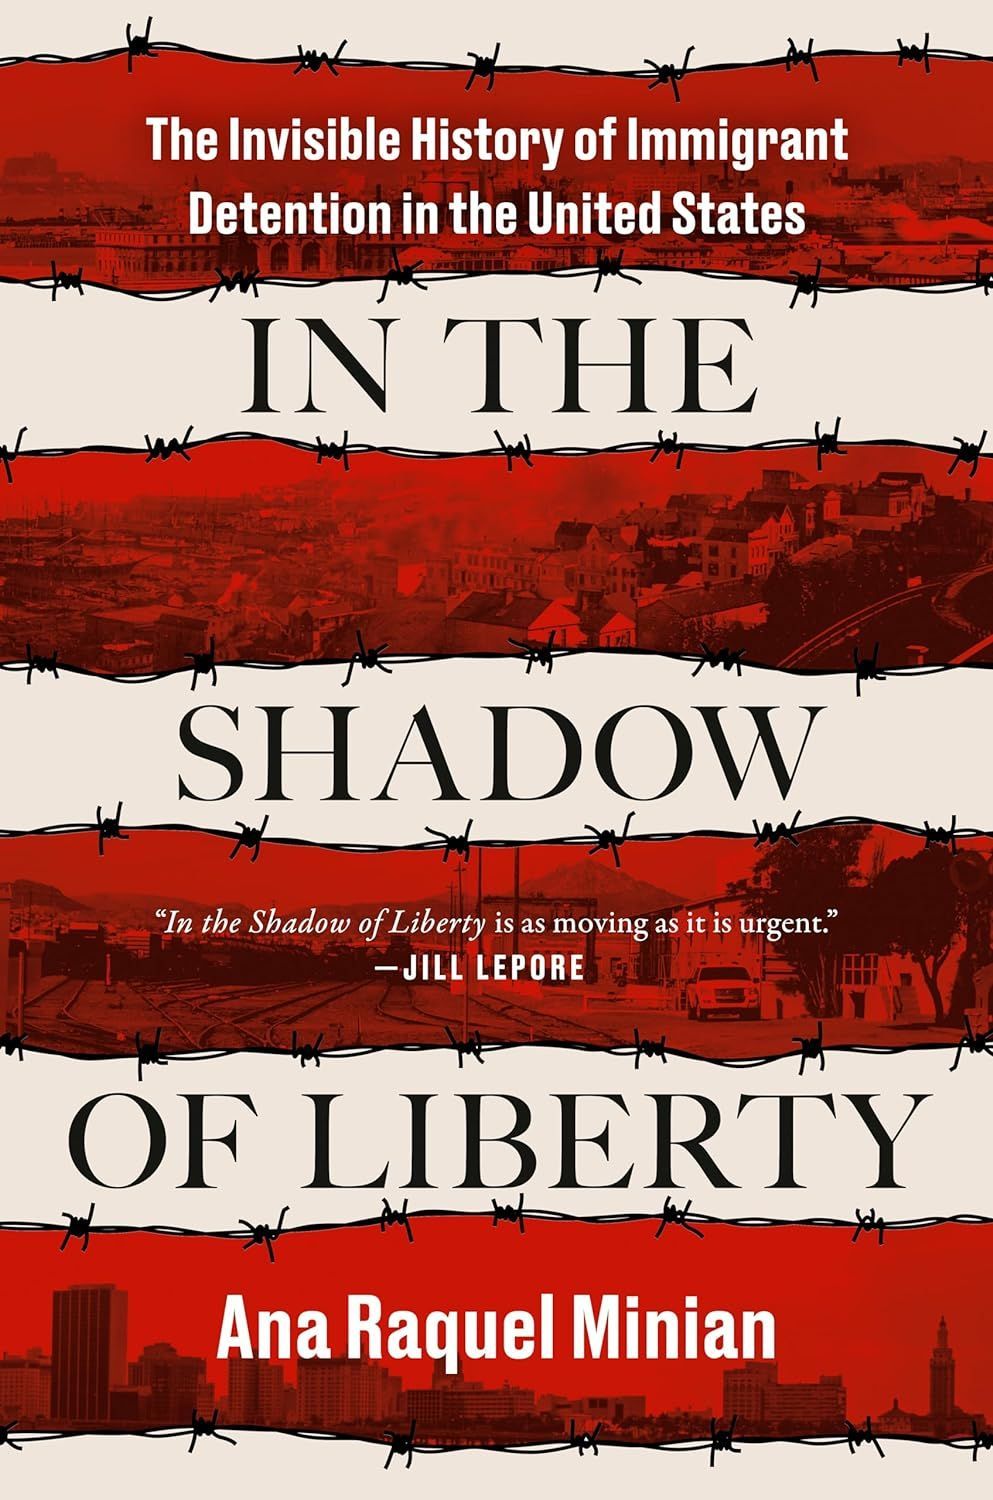 Intended to Be Cruel: On Ana Raquel Minian’s “In the Shadow of Liberty”